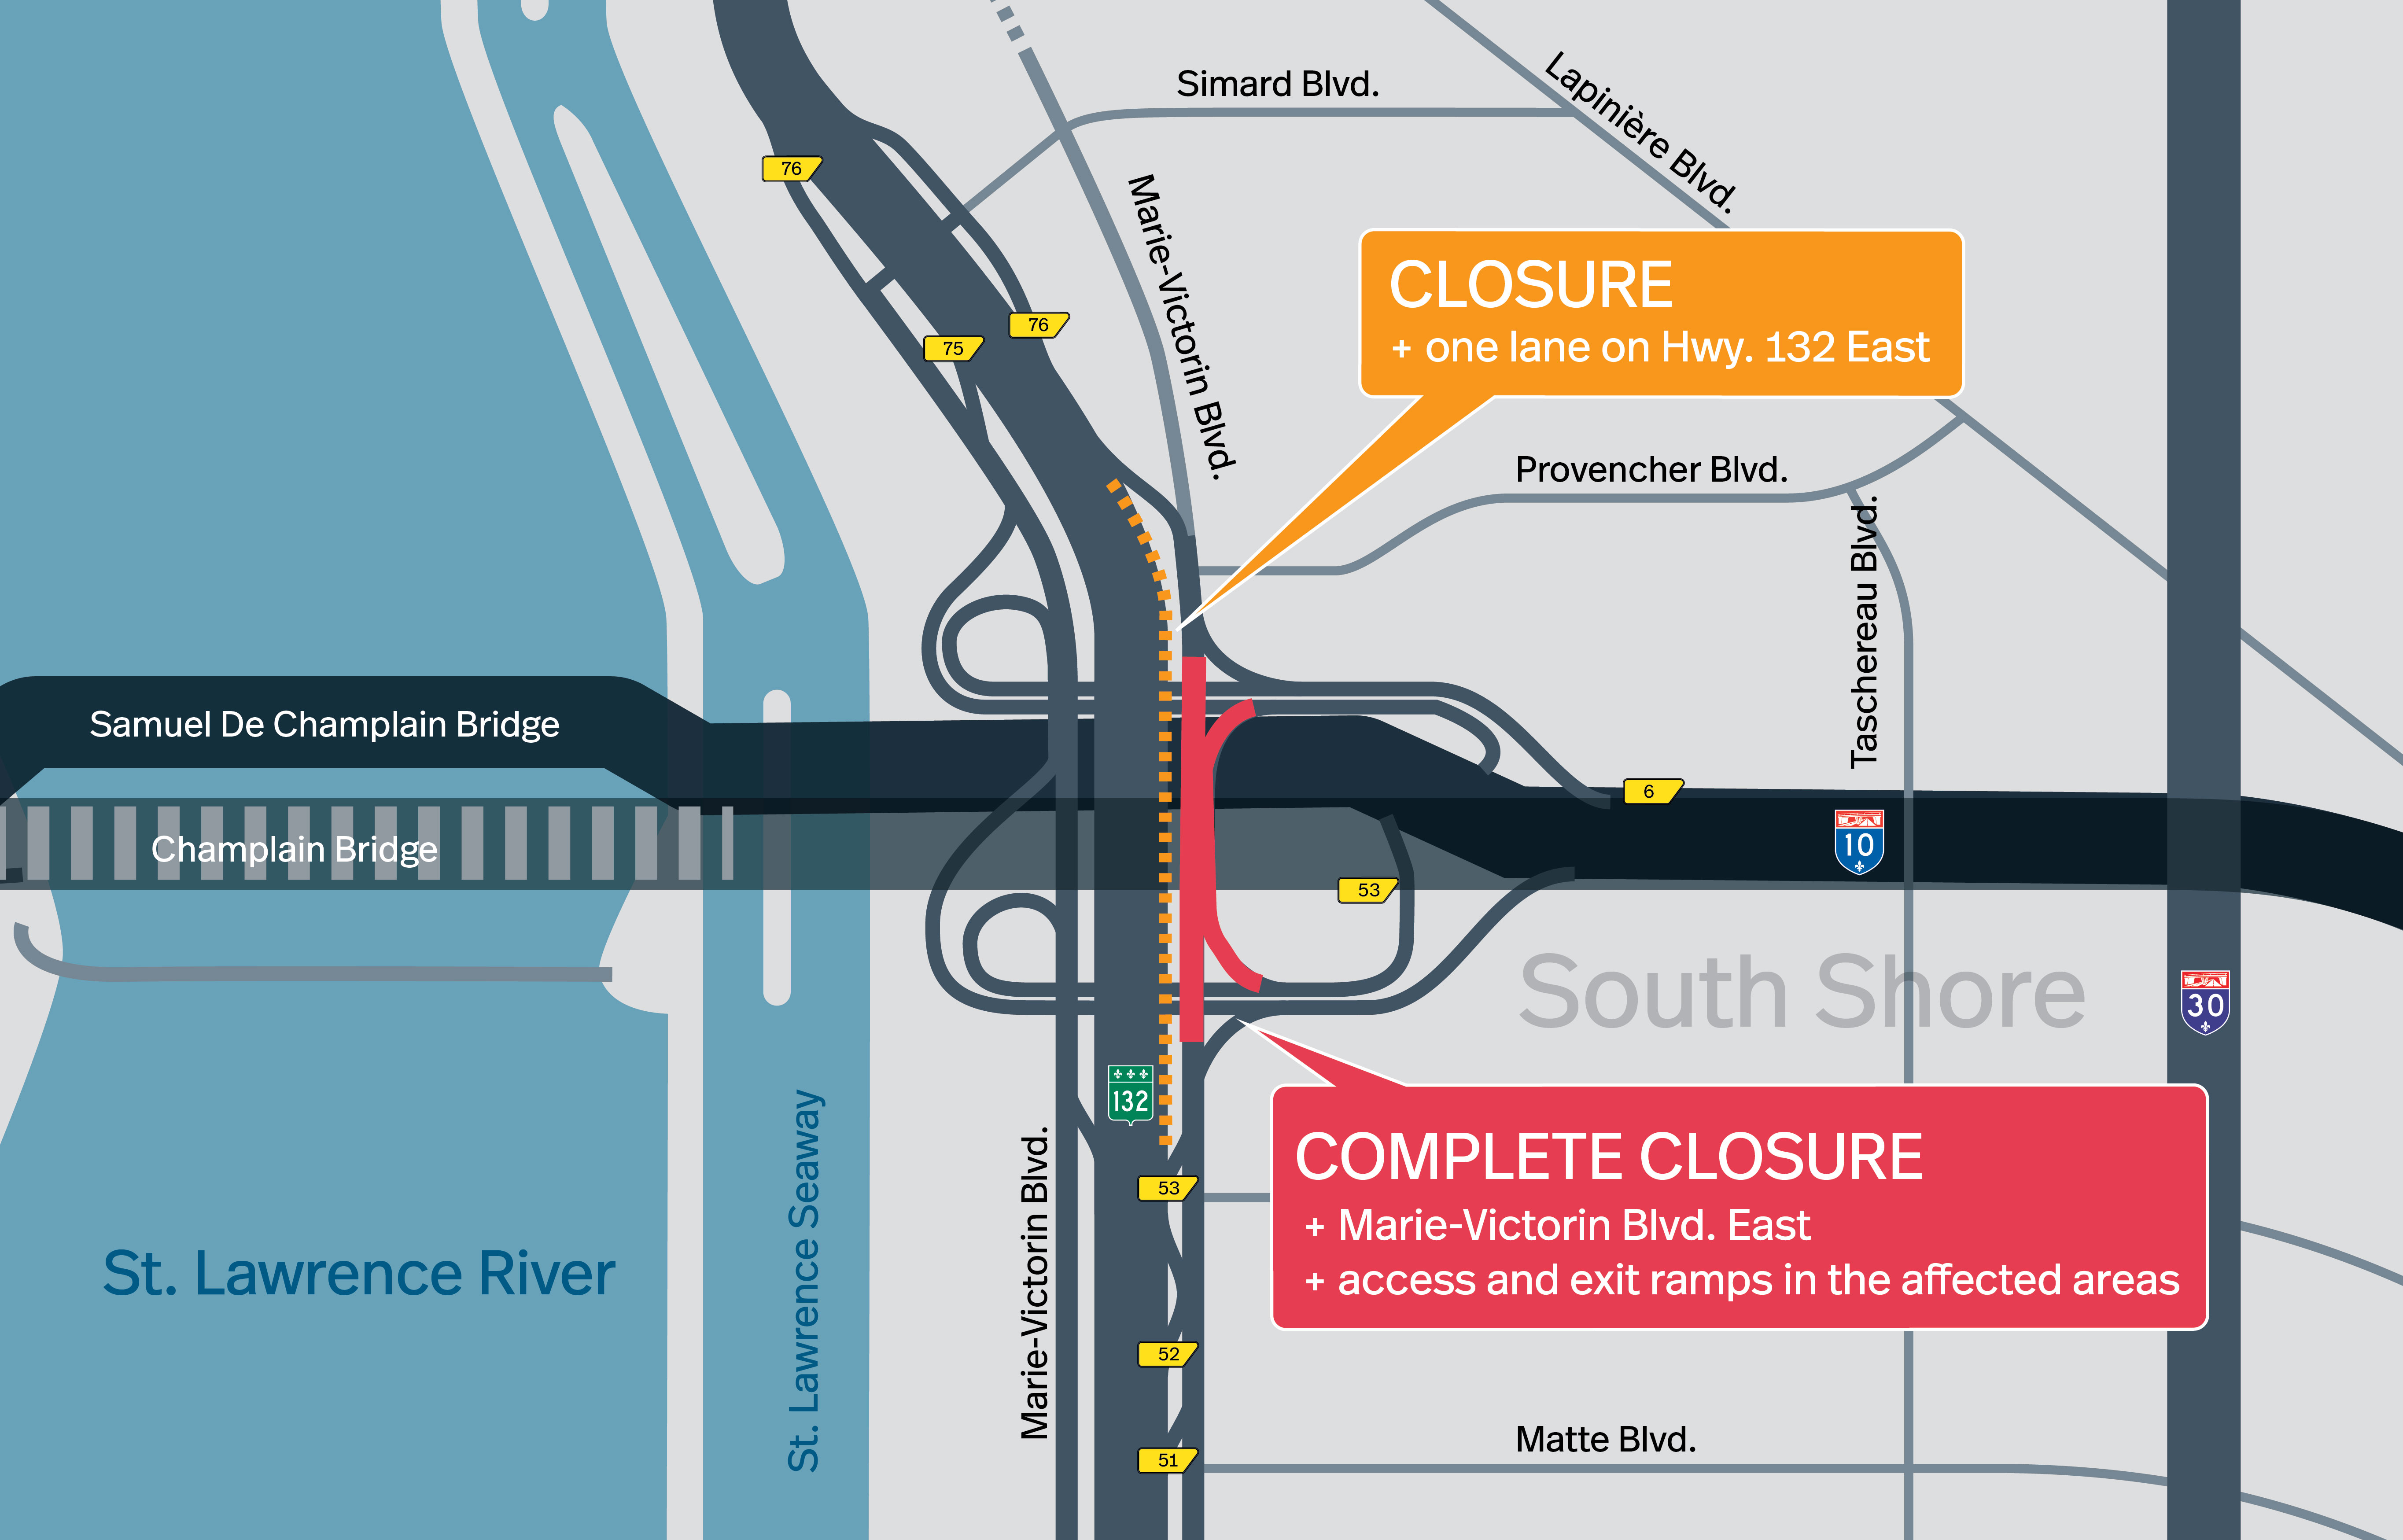 Brossard Sector | Complete closure of Marie-Victorin Blvd. East under the original Champlain Bridge, from September 30 to October 3